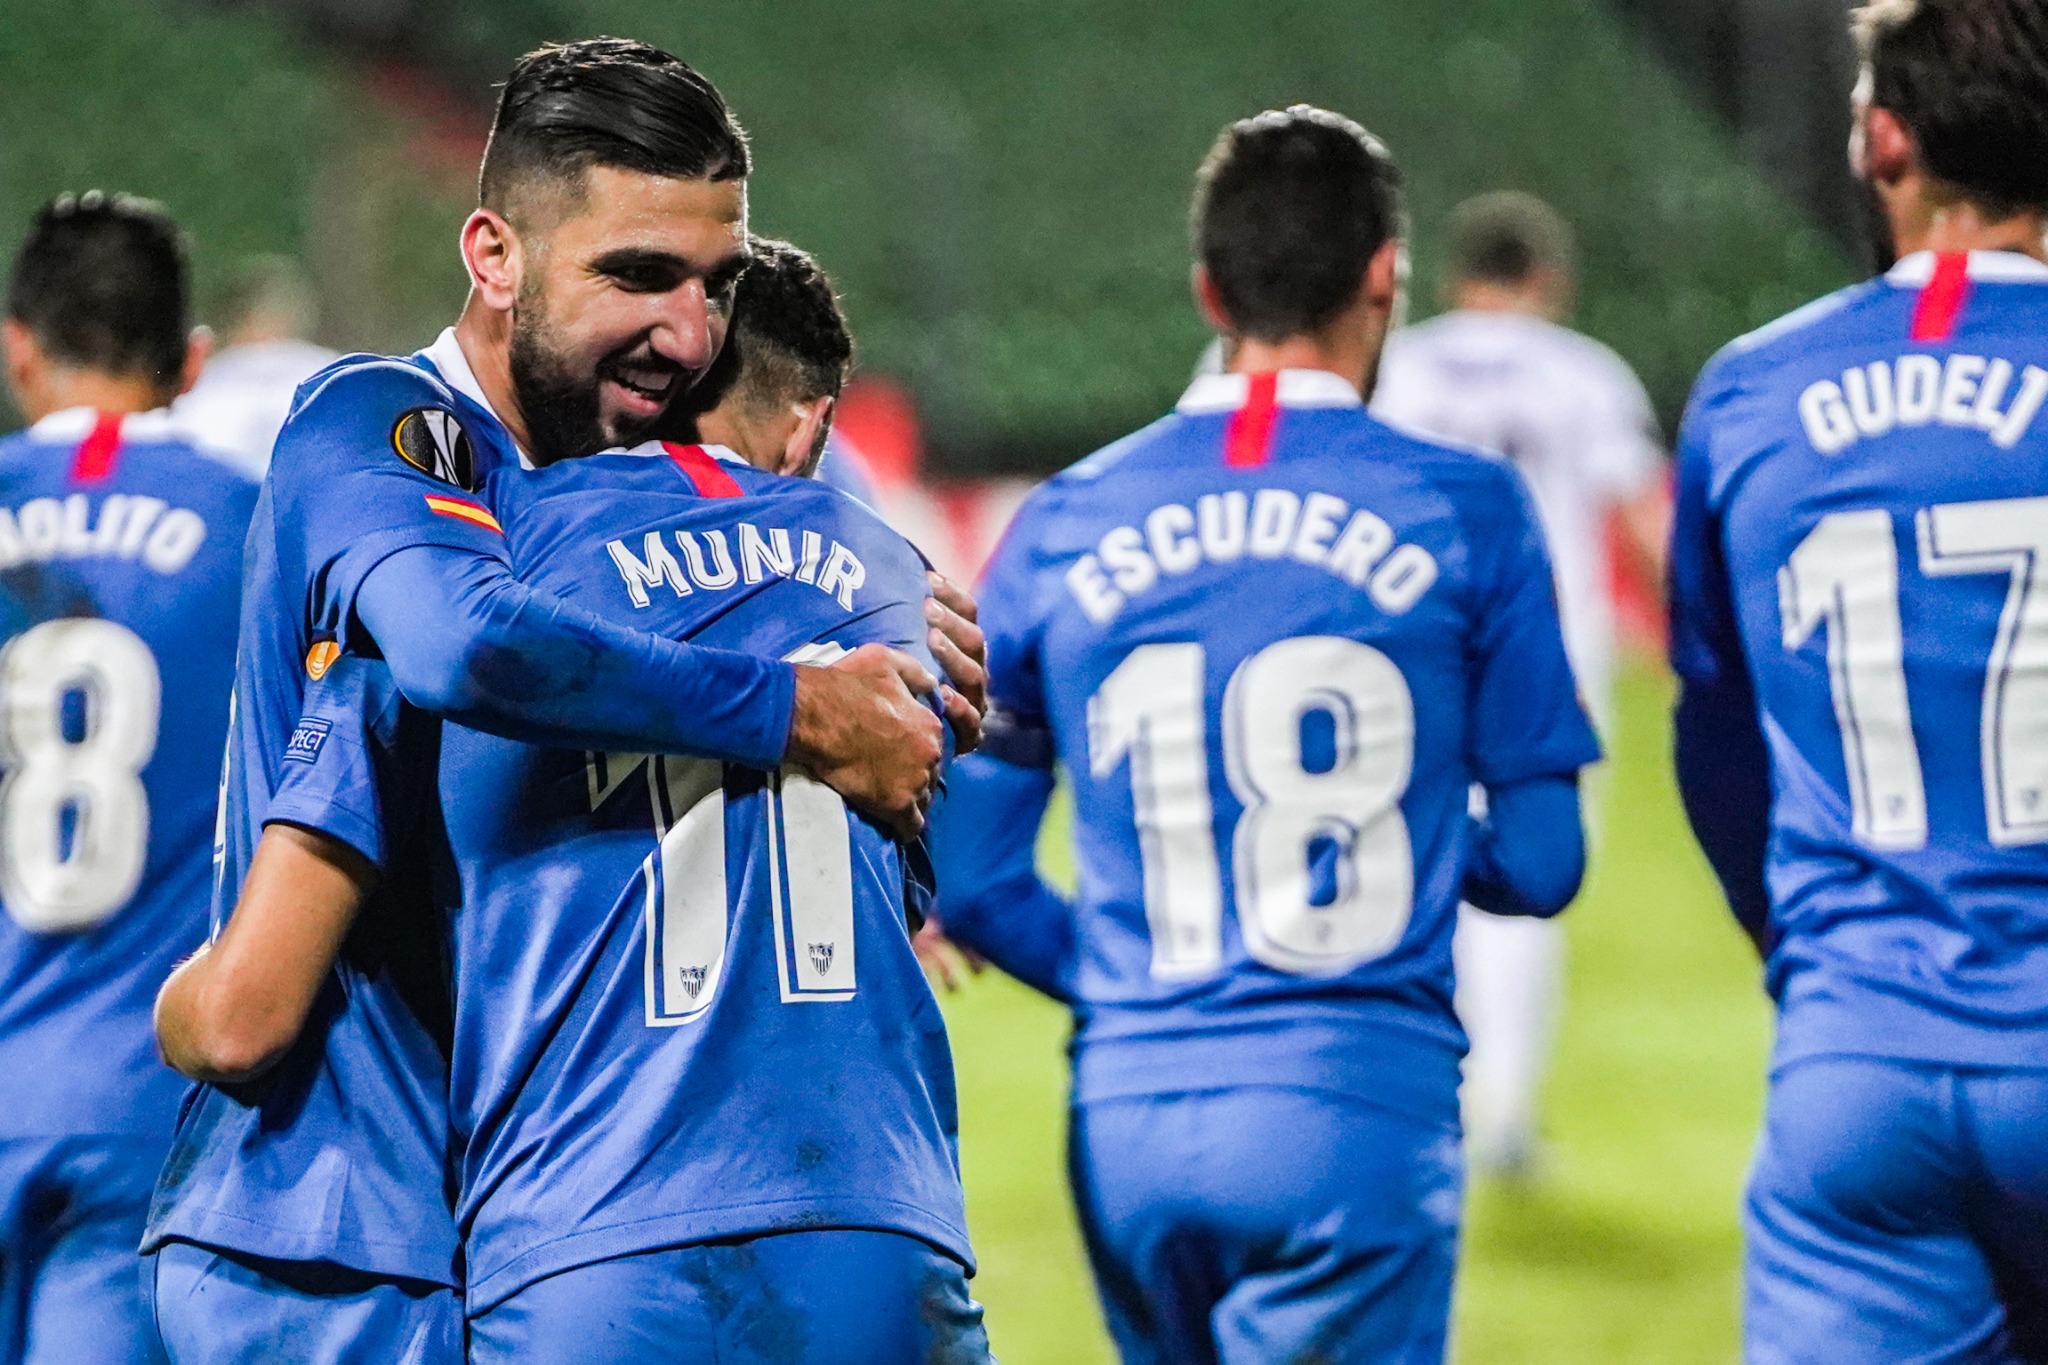 Dabbur and Munir celebrate one of the goals in Luxembourg